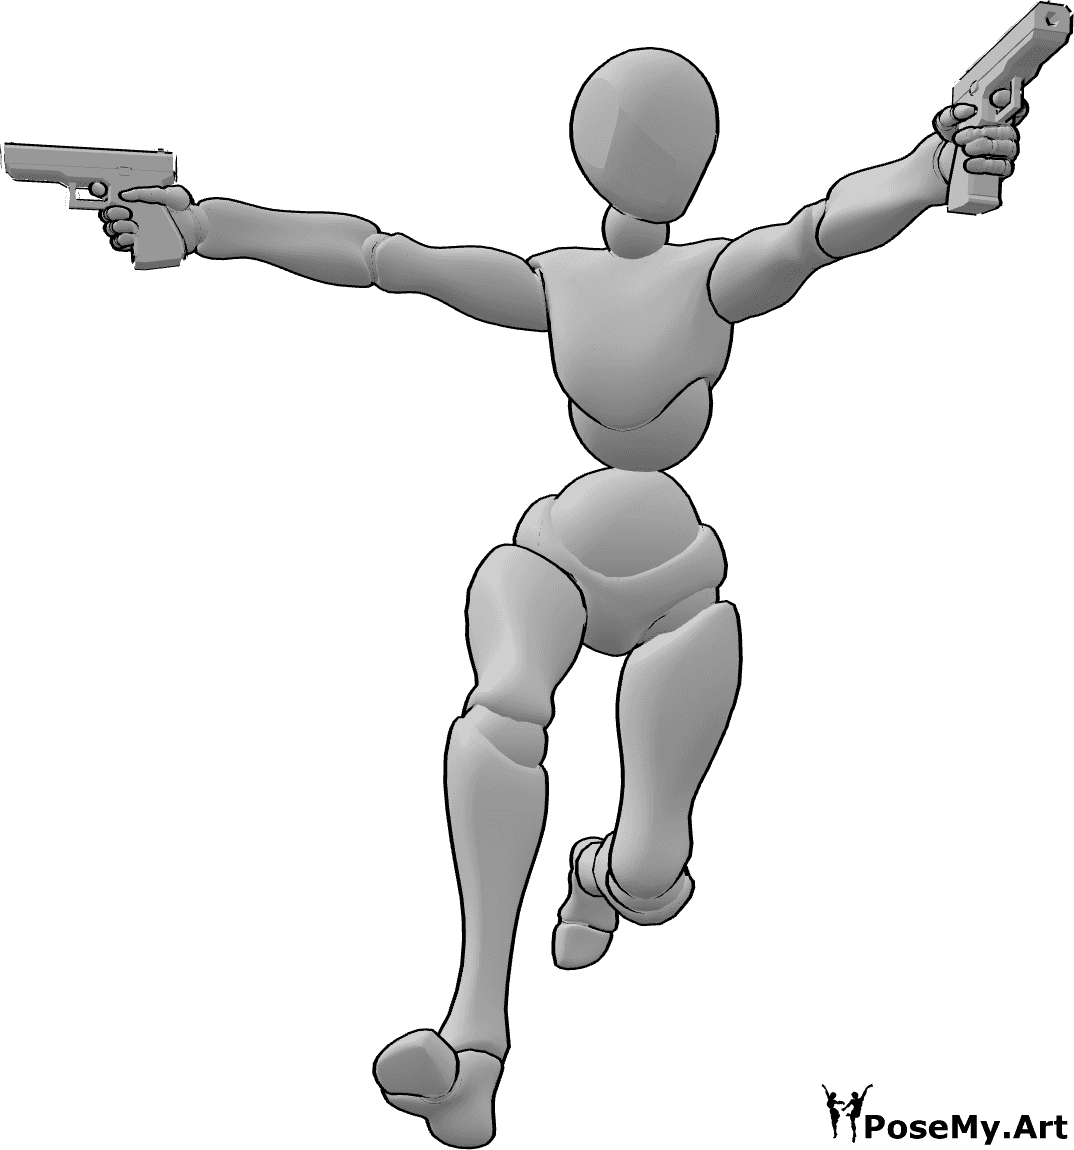 Pose Reference - Running two guns pose - Female is running, holding and aiming two guns in two directions